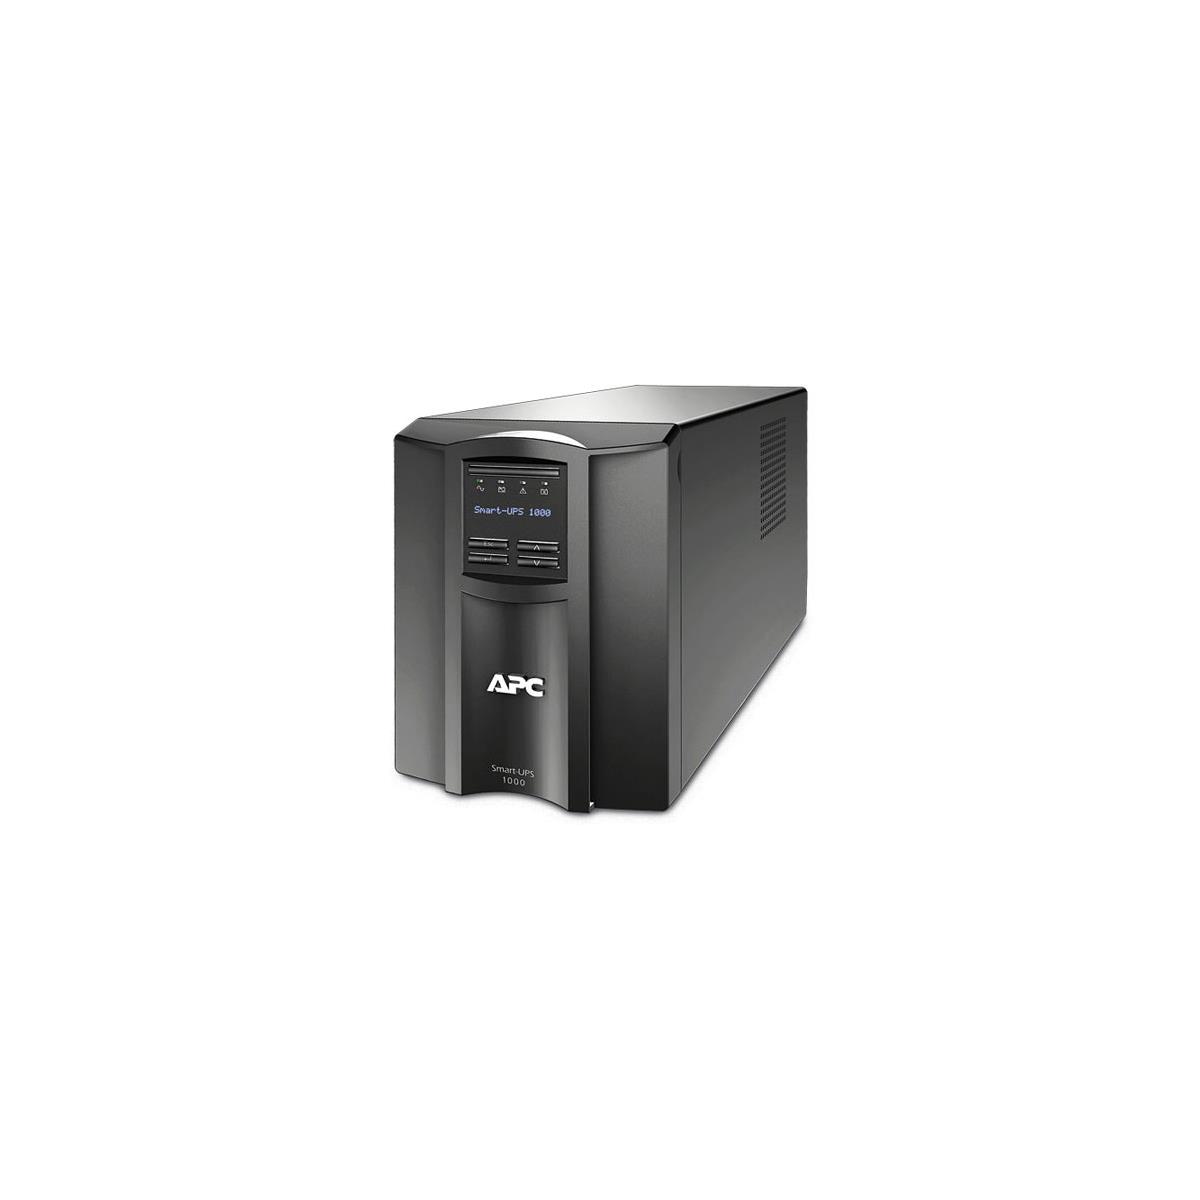 Image of American Power Conversion (APC) Smart-UPS 1000 VA 670 Watts 8 Outlets UPS w/LCD